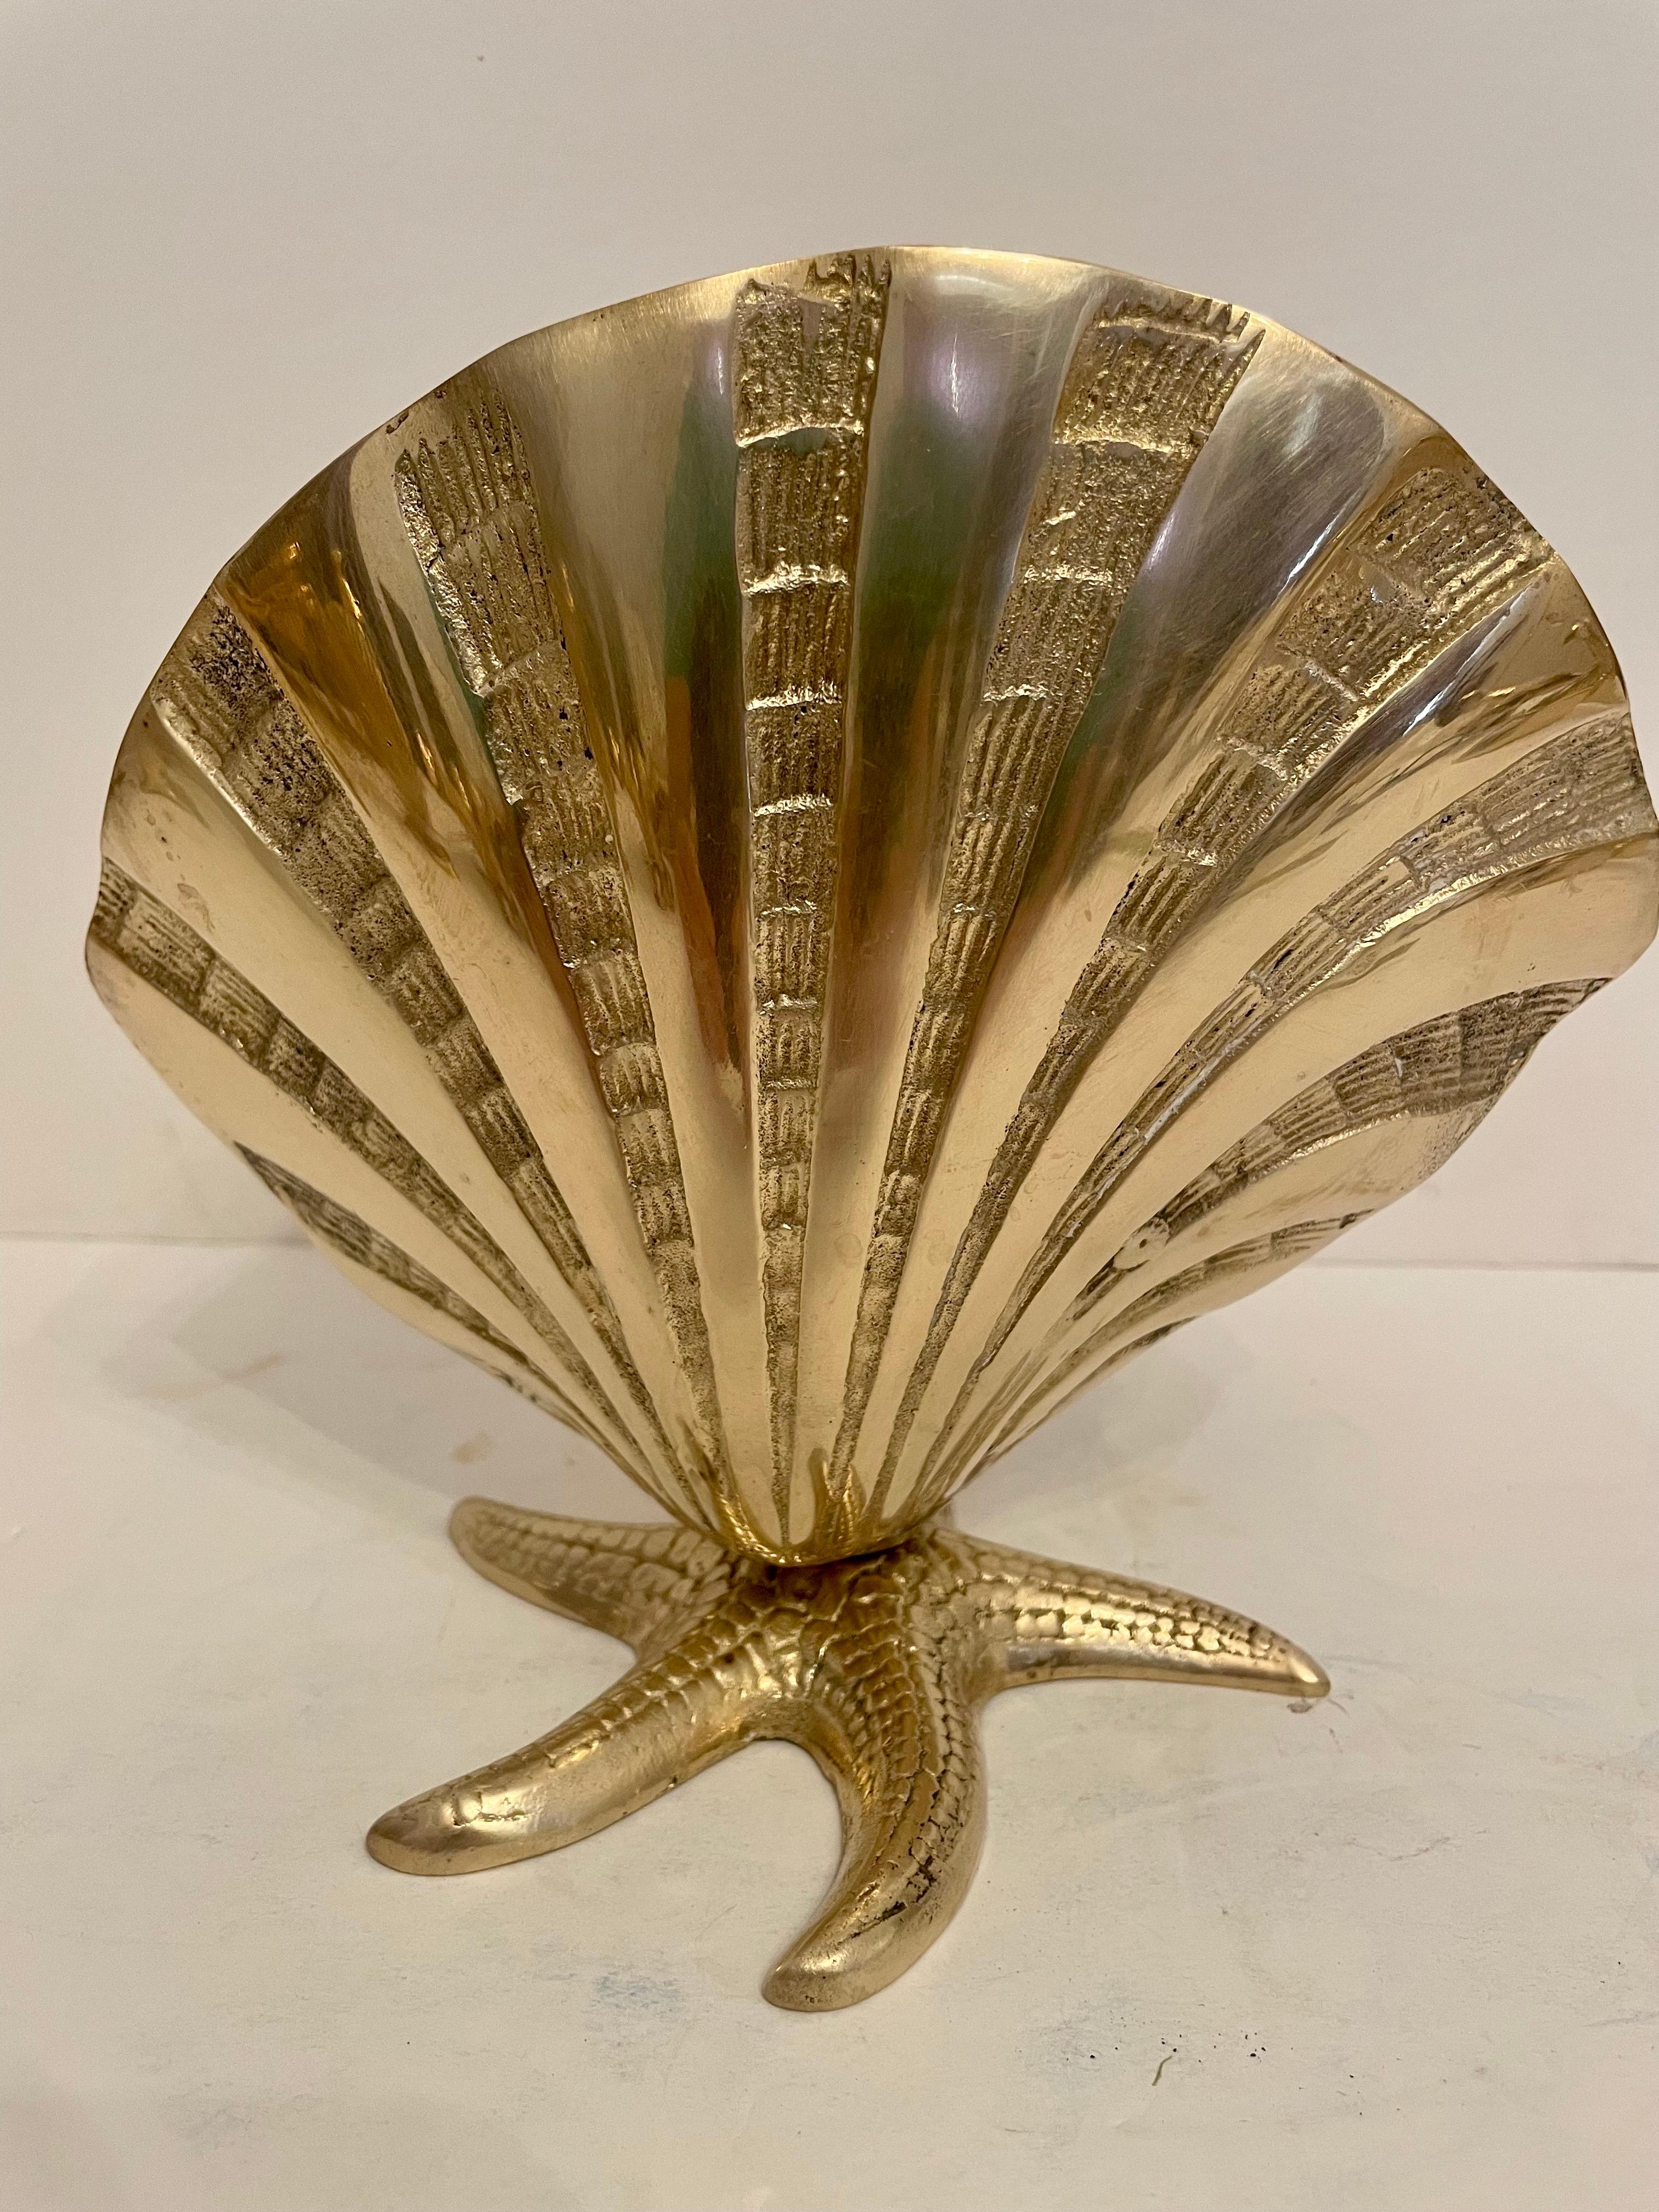 Large brass sea shell planter on starfish base. Very unusual design with nice detail. nice hand polished finish. some patina spots inside, but overall nice condition. Ready for your beach house!